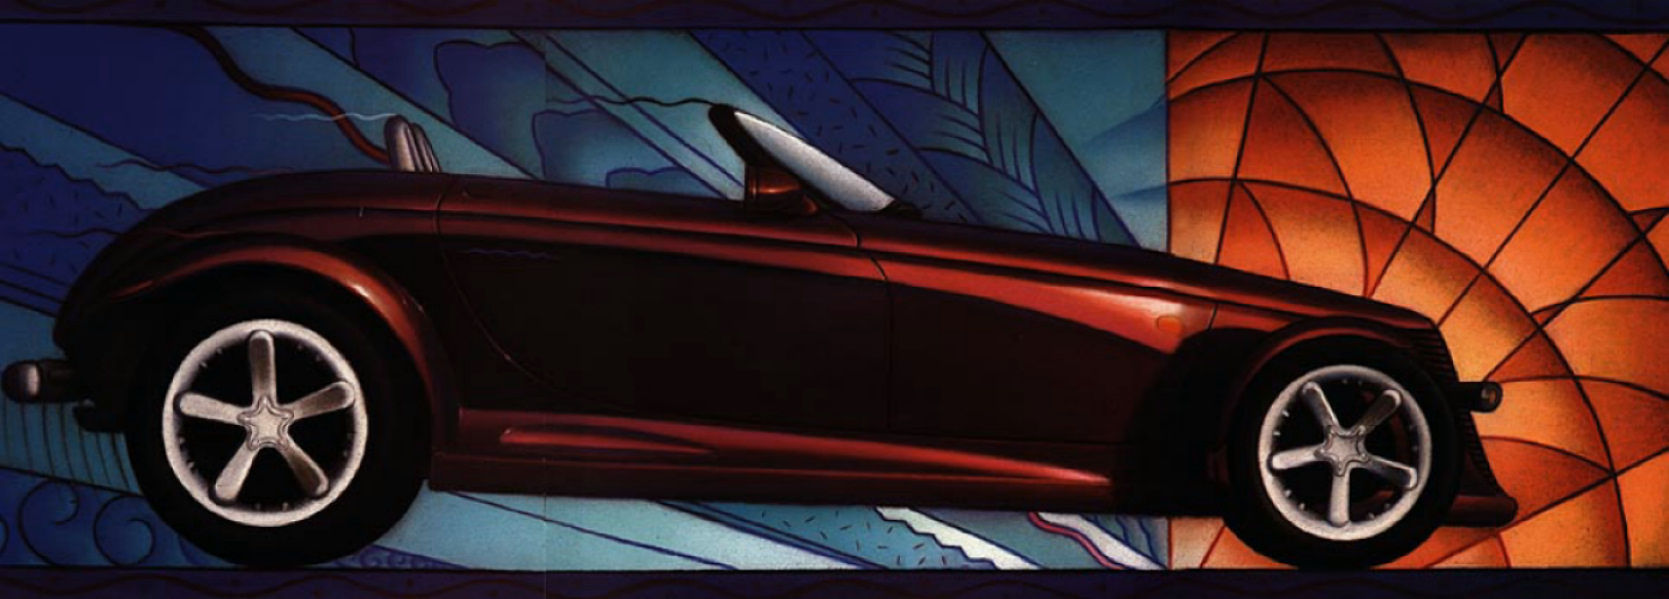 1997_Plymouth_Prowler_Media_Release-04